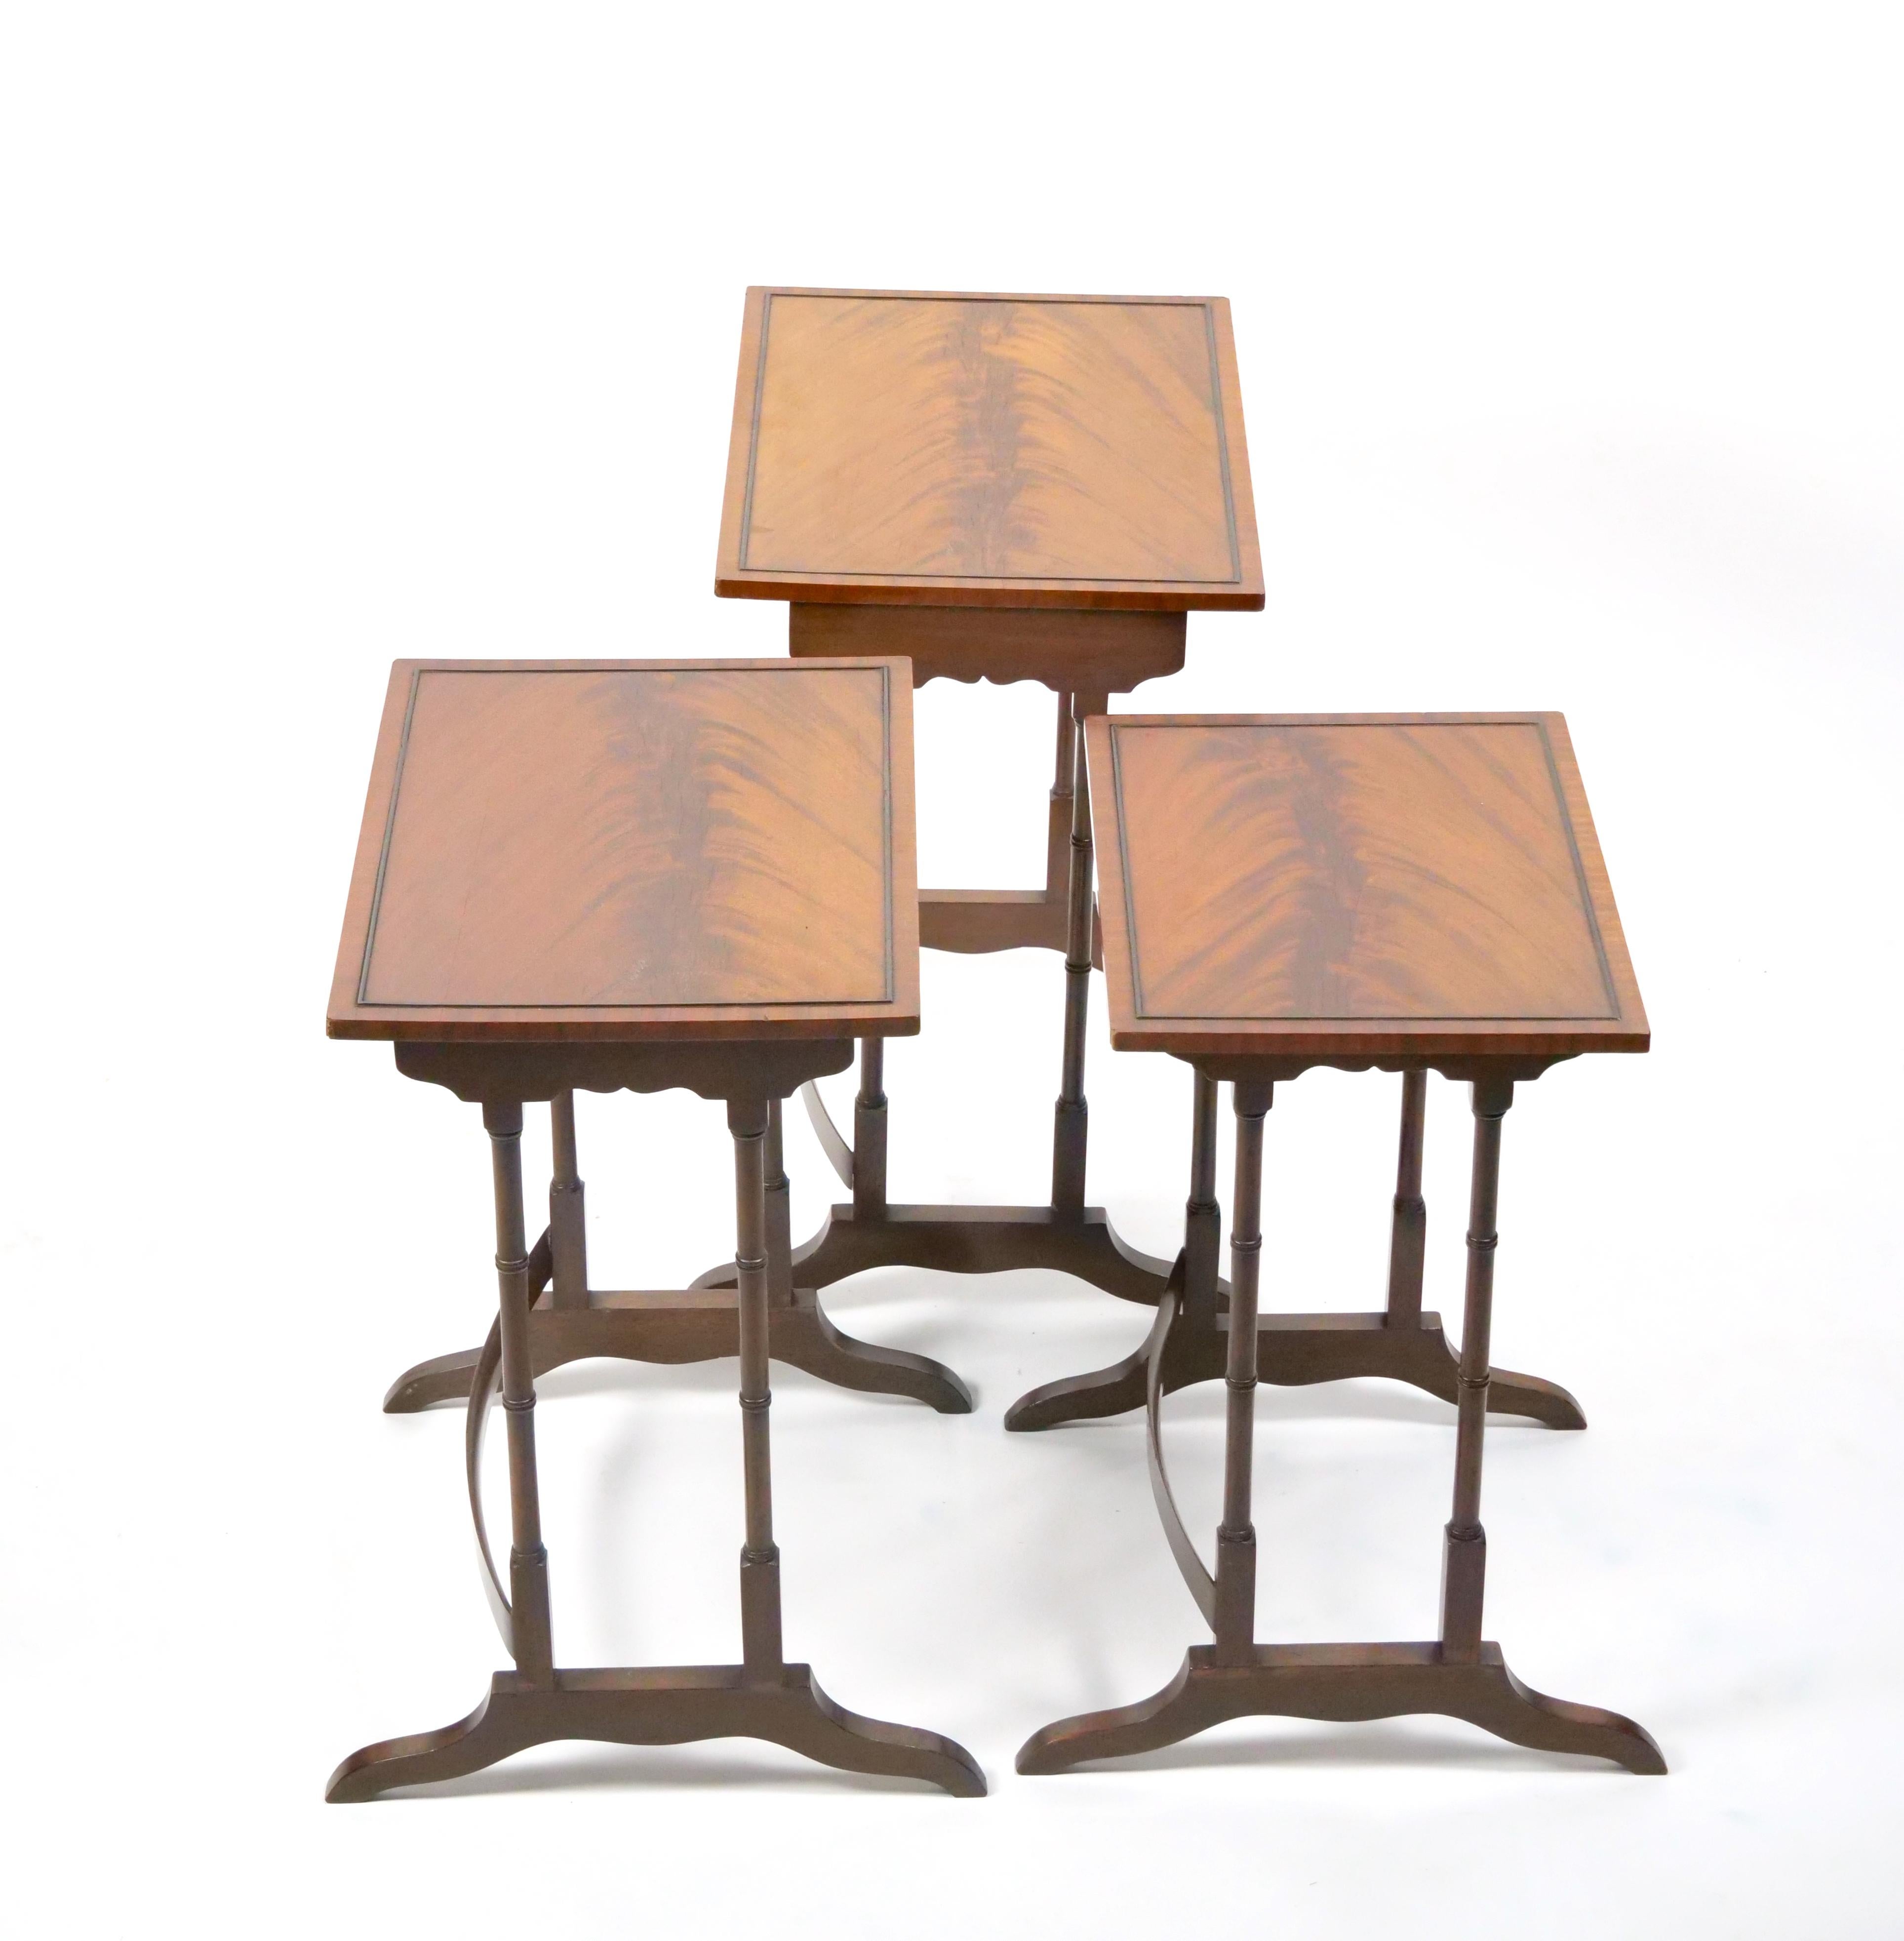 19th century Mahogany Inlaid Top Decorated Stacking Tables For Sale 2